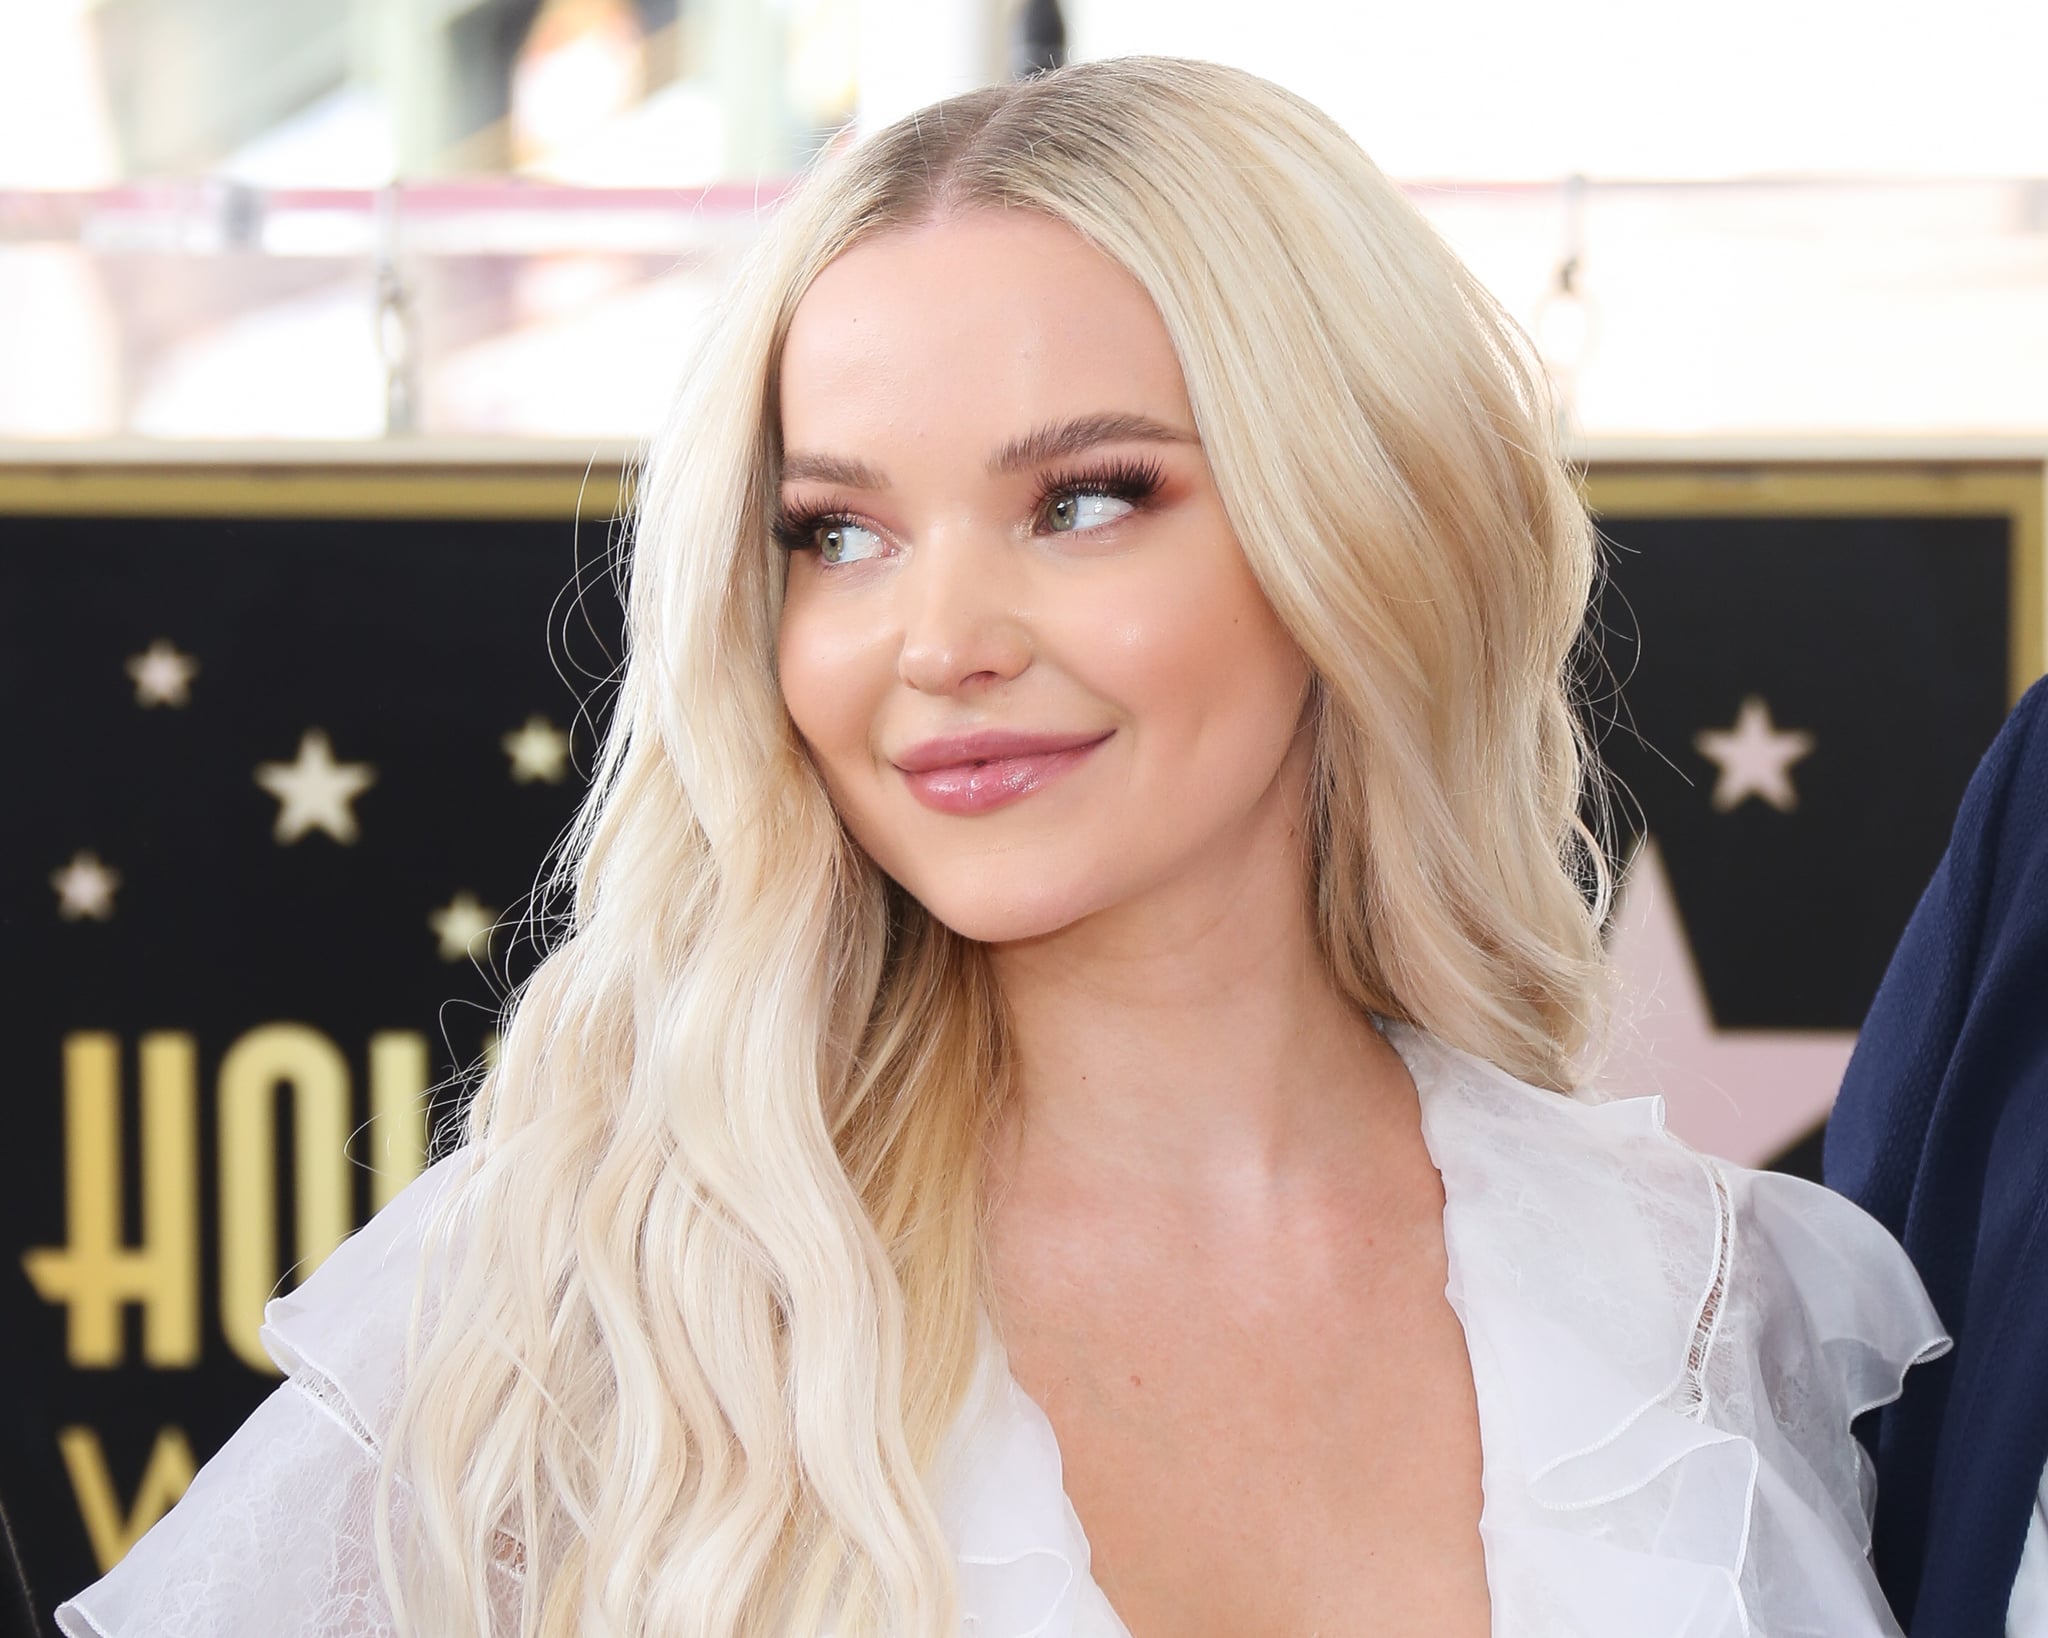 HOLLYWOOD, CALIFORNIA - JULY 24: Actress Dove Cameron attends a ceremony to honour Kenny Ortega with a star on the Hollywood Walk Of Fame on July 24, 2019 in Hollywood, California. (Photo by Paul Archuleta/FilmMagic)